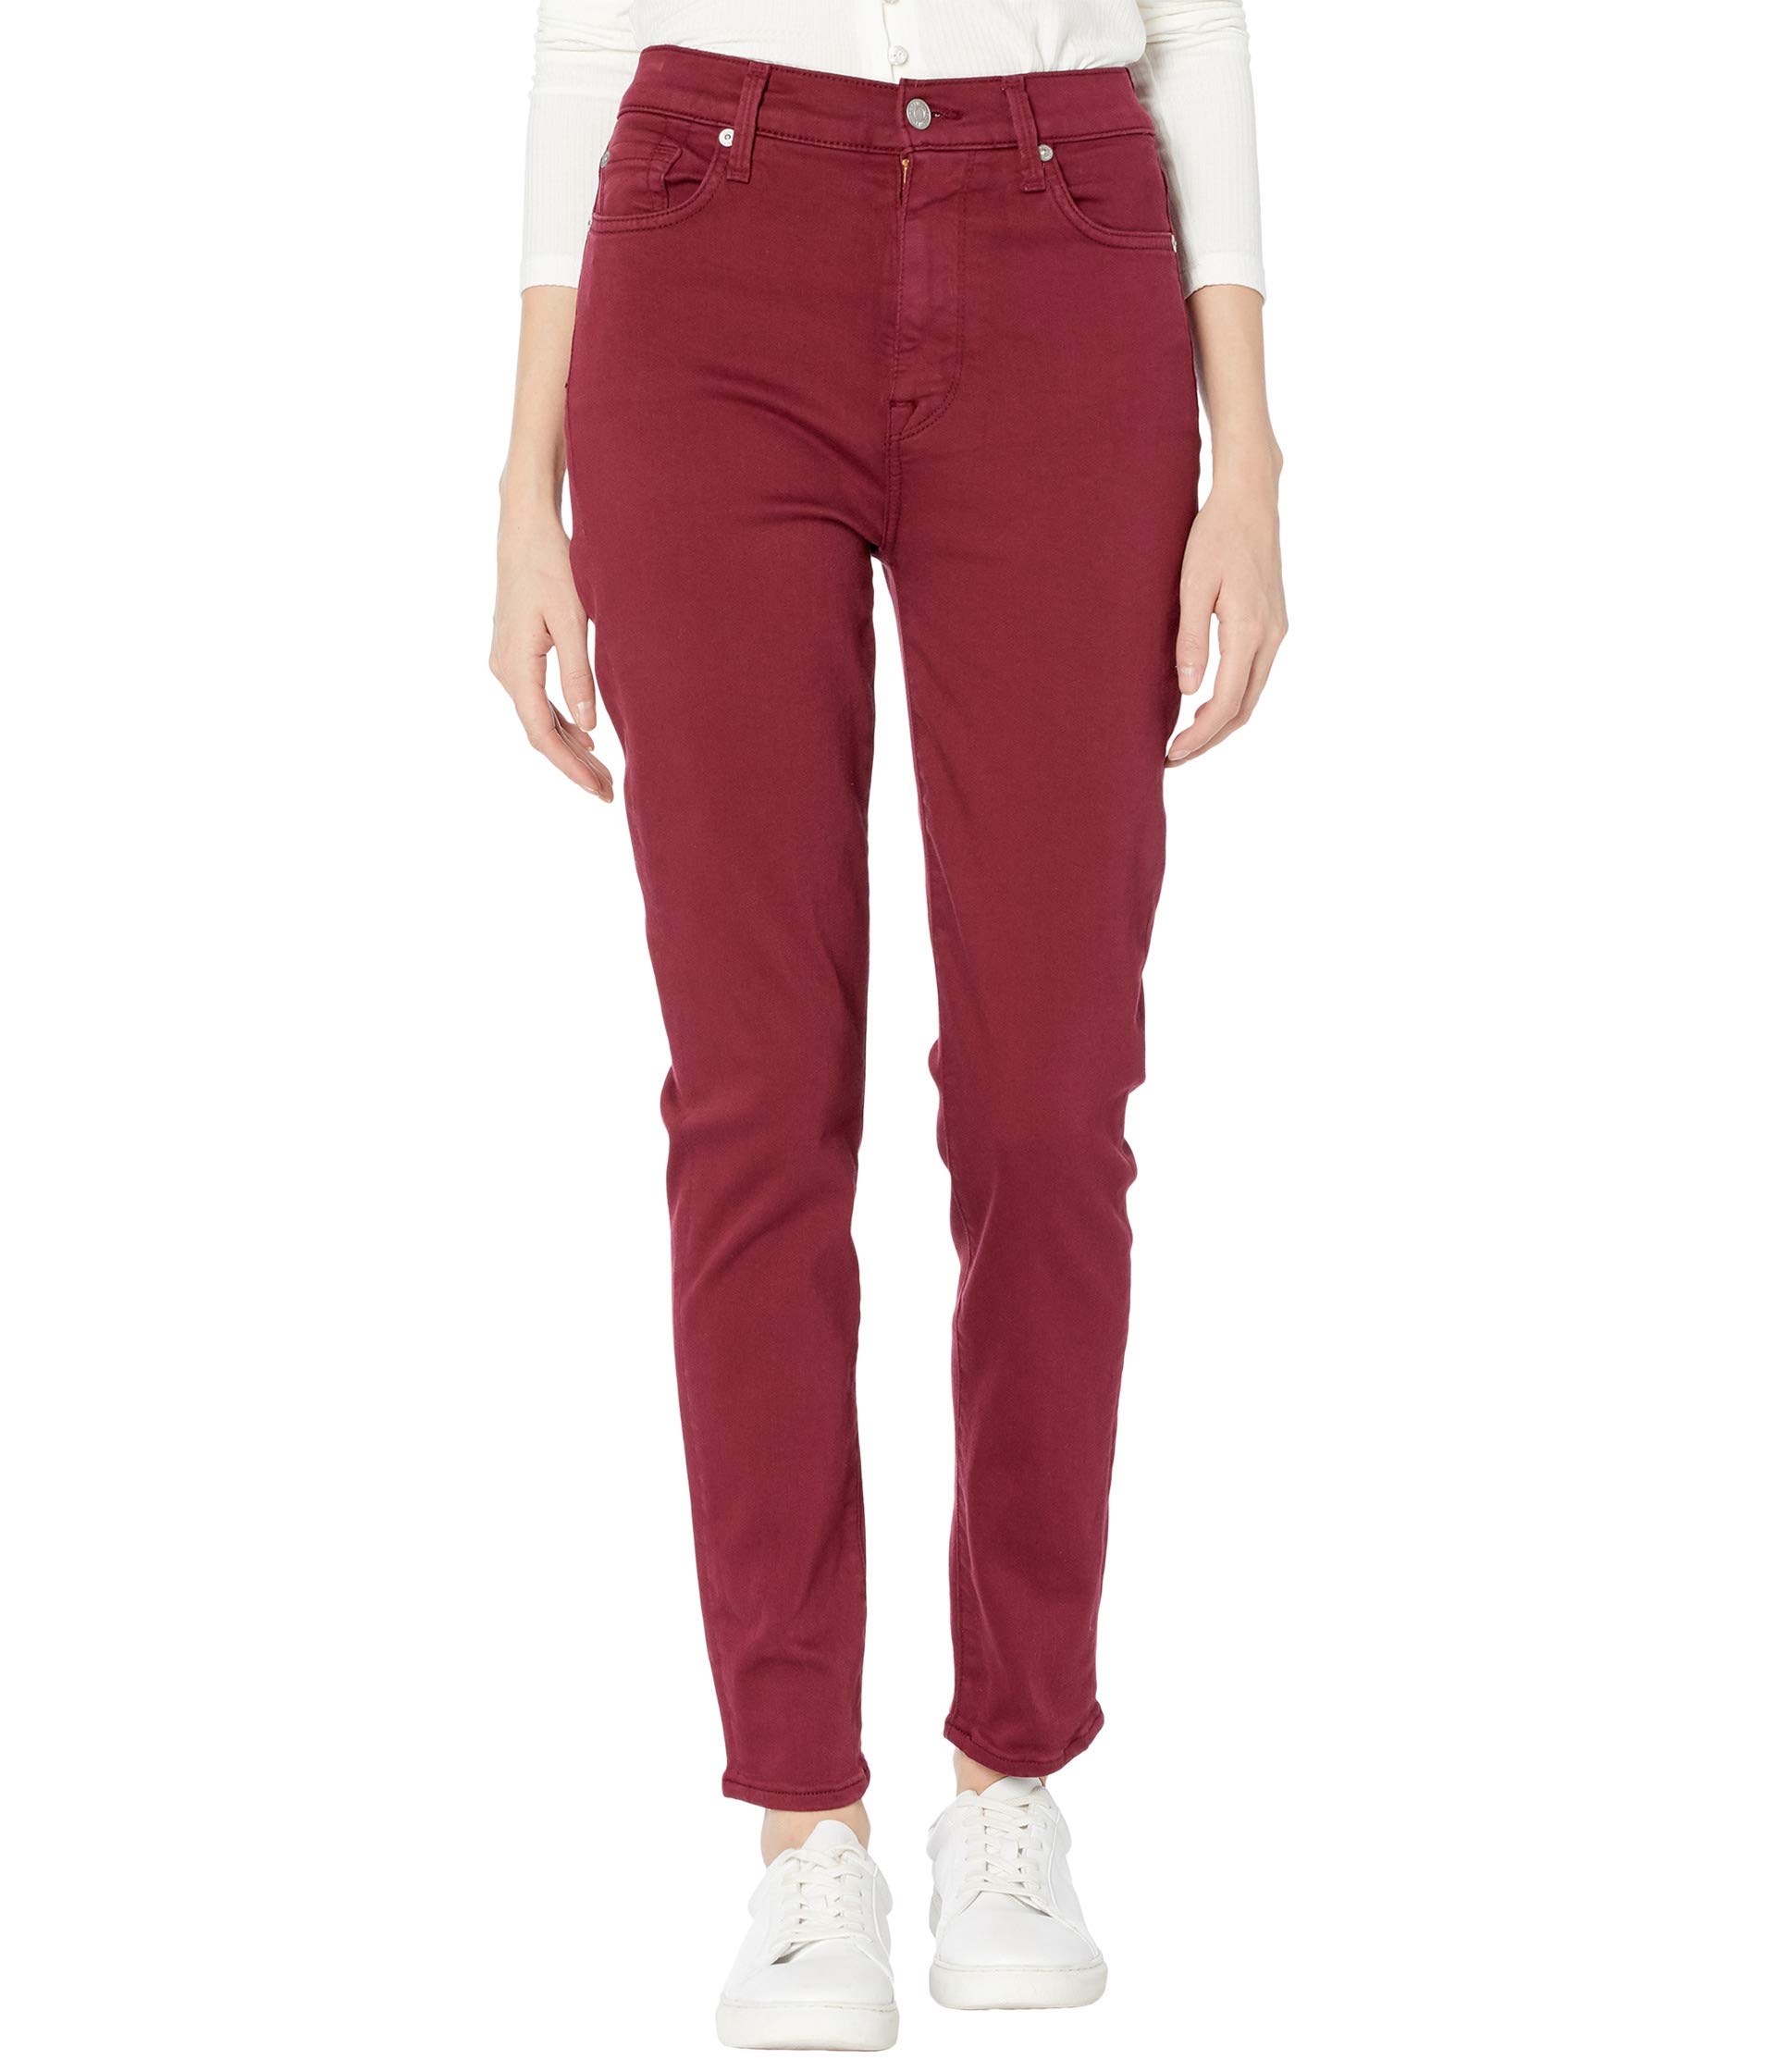 Джинсы 7 For All Mankind, High-Waist Ankle Skinny in Merlot джинсы 7 for all mankind ankle skinny laser snake in reed coated